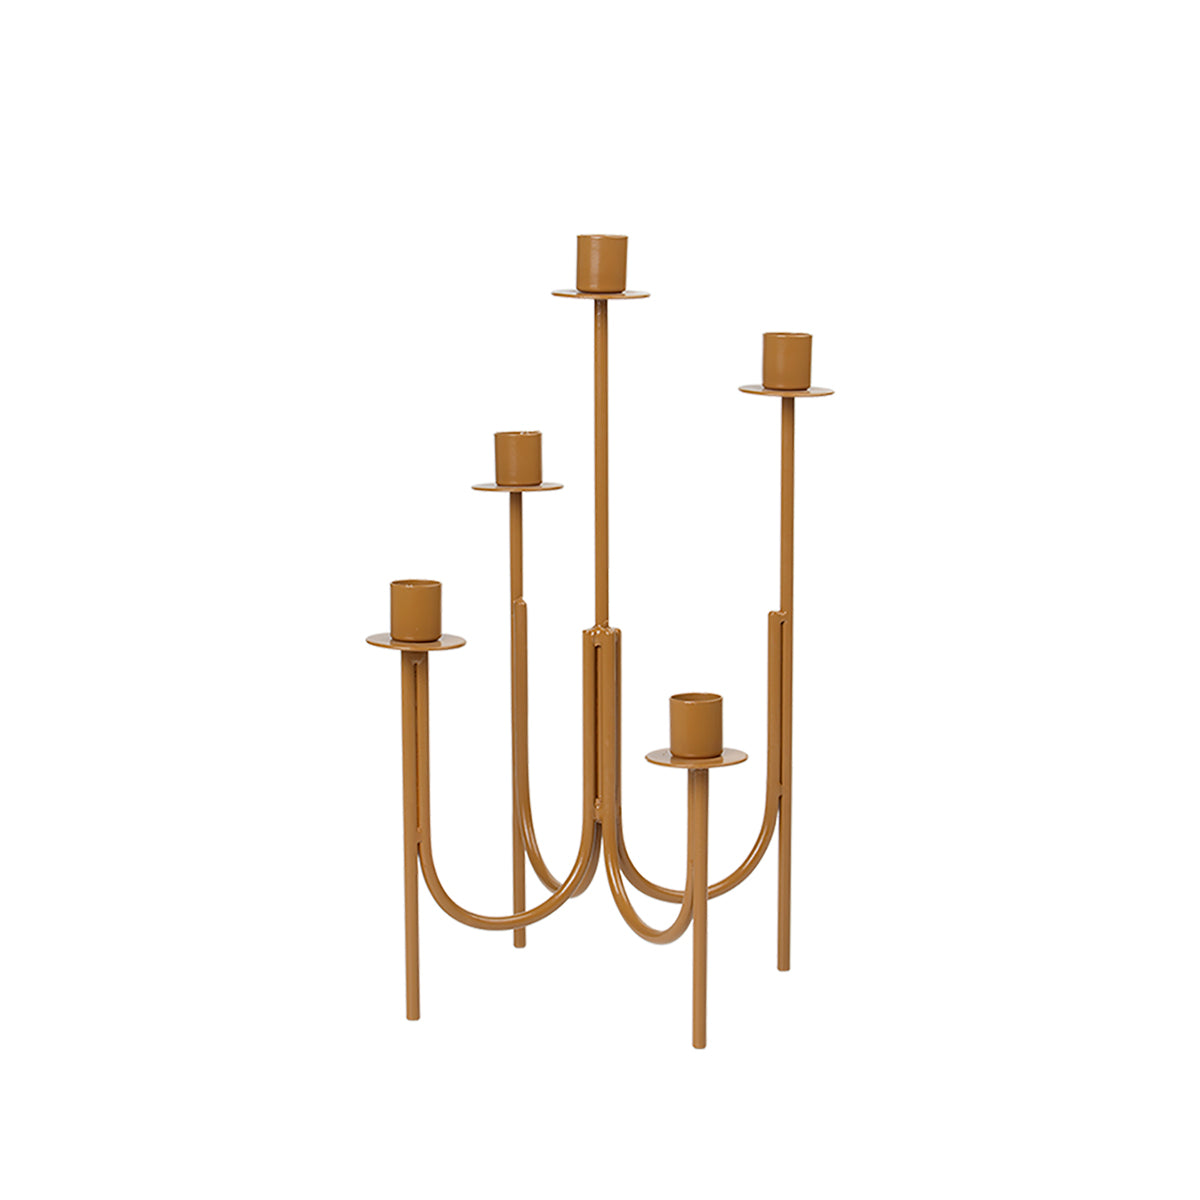 Farri Candle Holder - Golden Brown, Powder coated iron